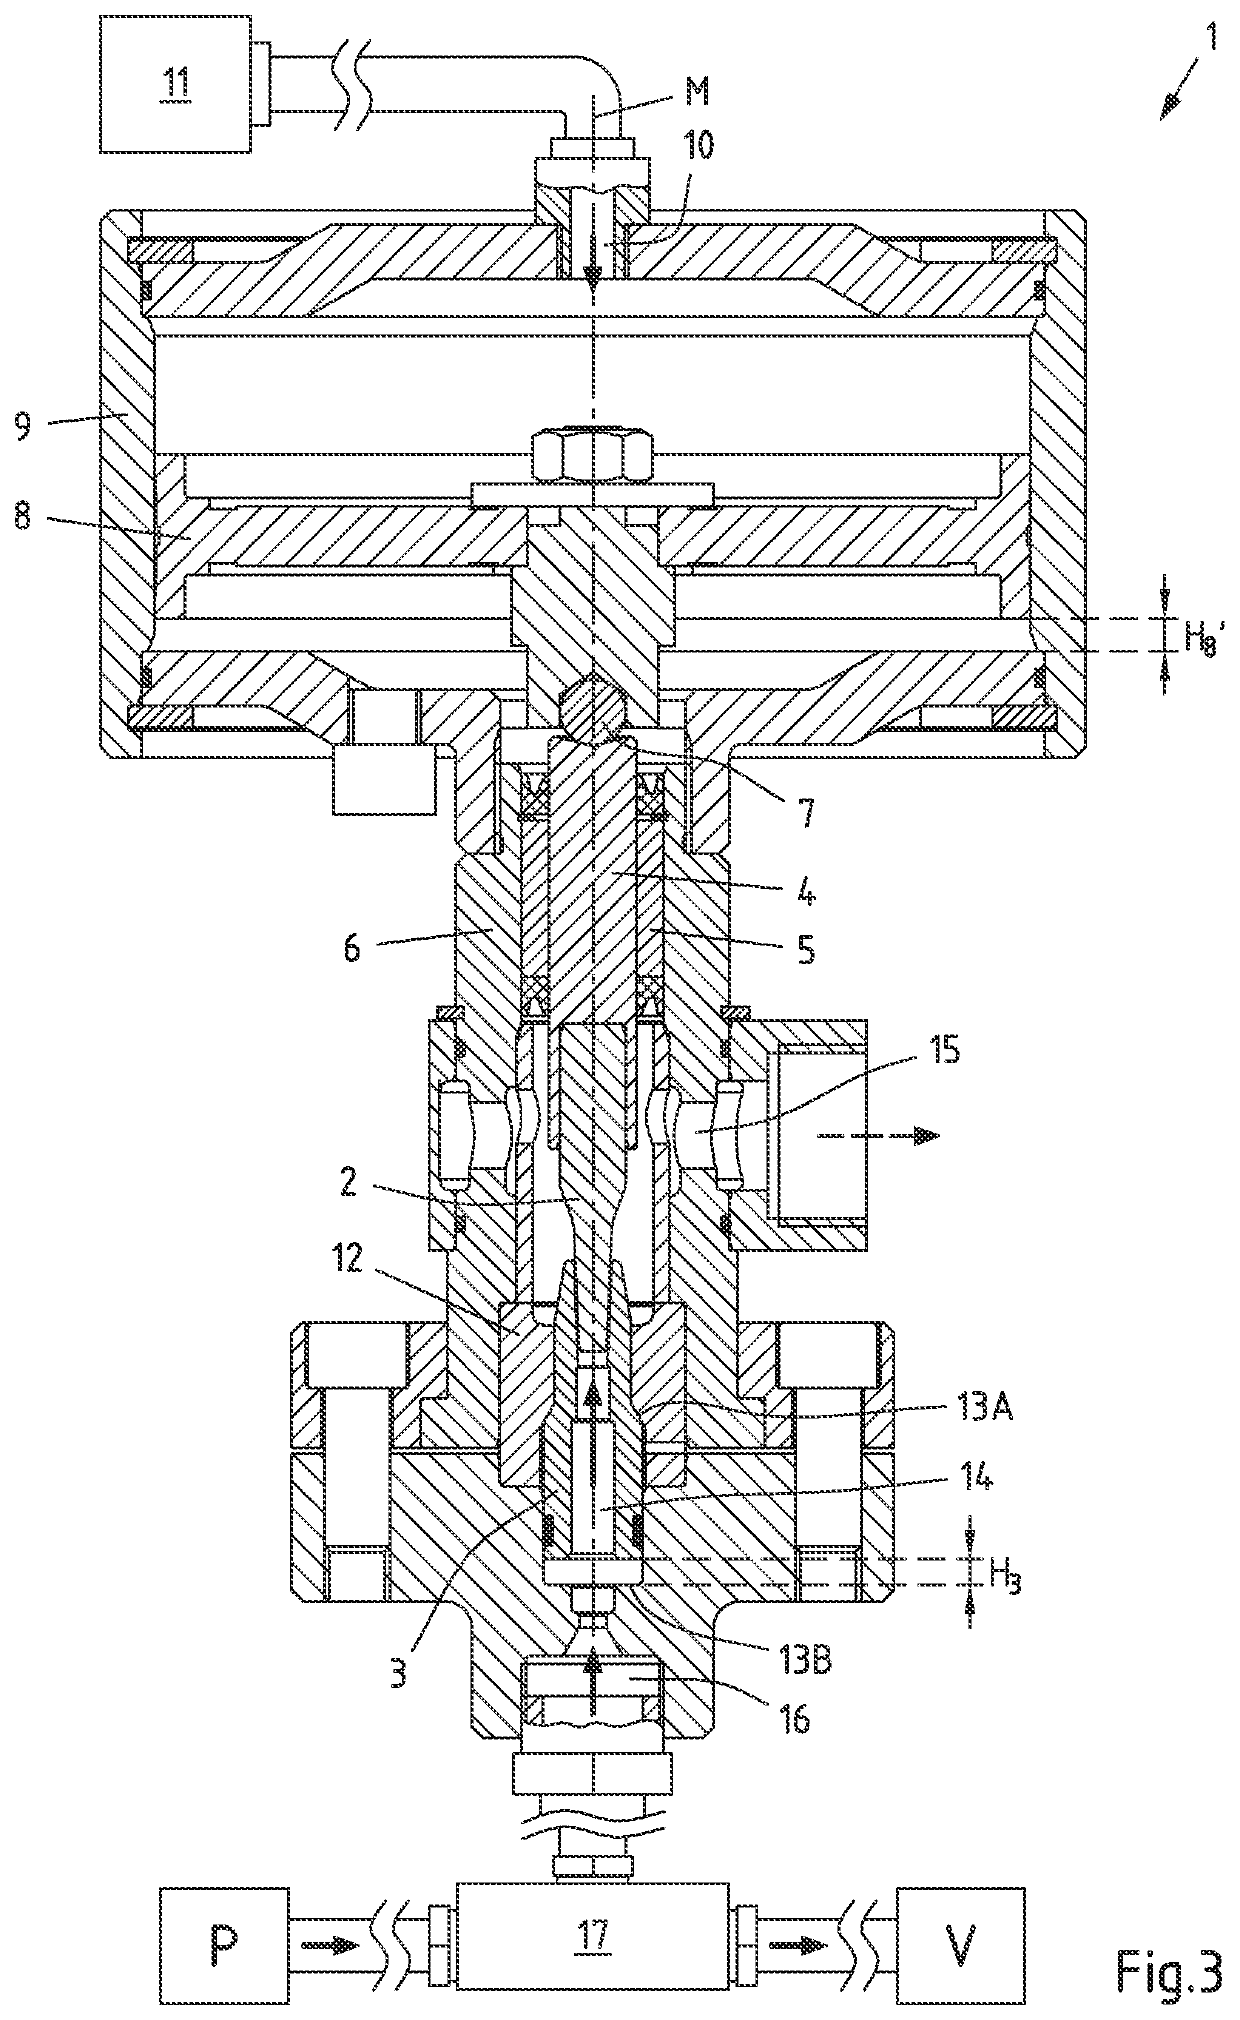 Device for Regulating the Pressure of Fluids